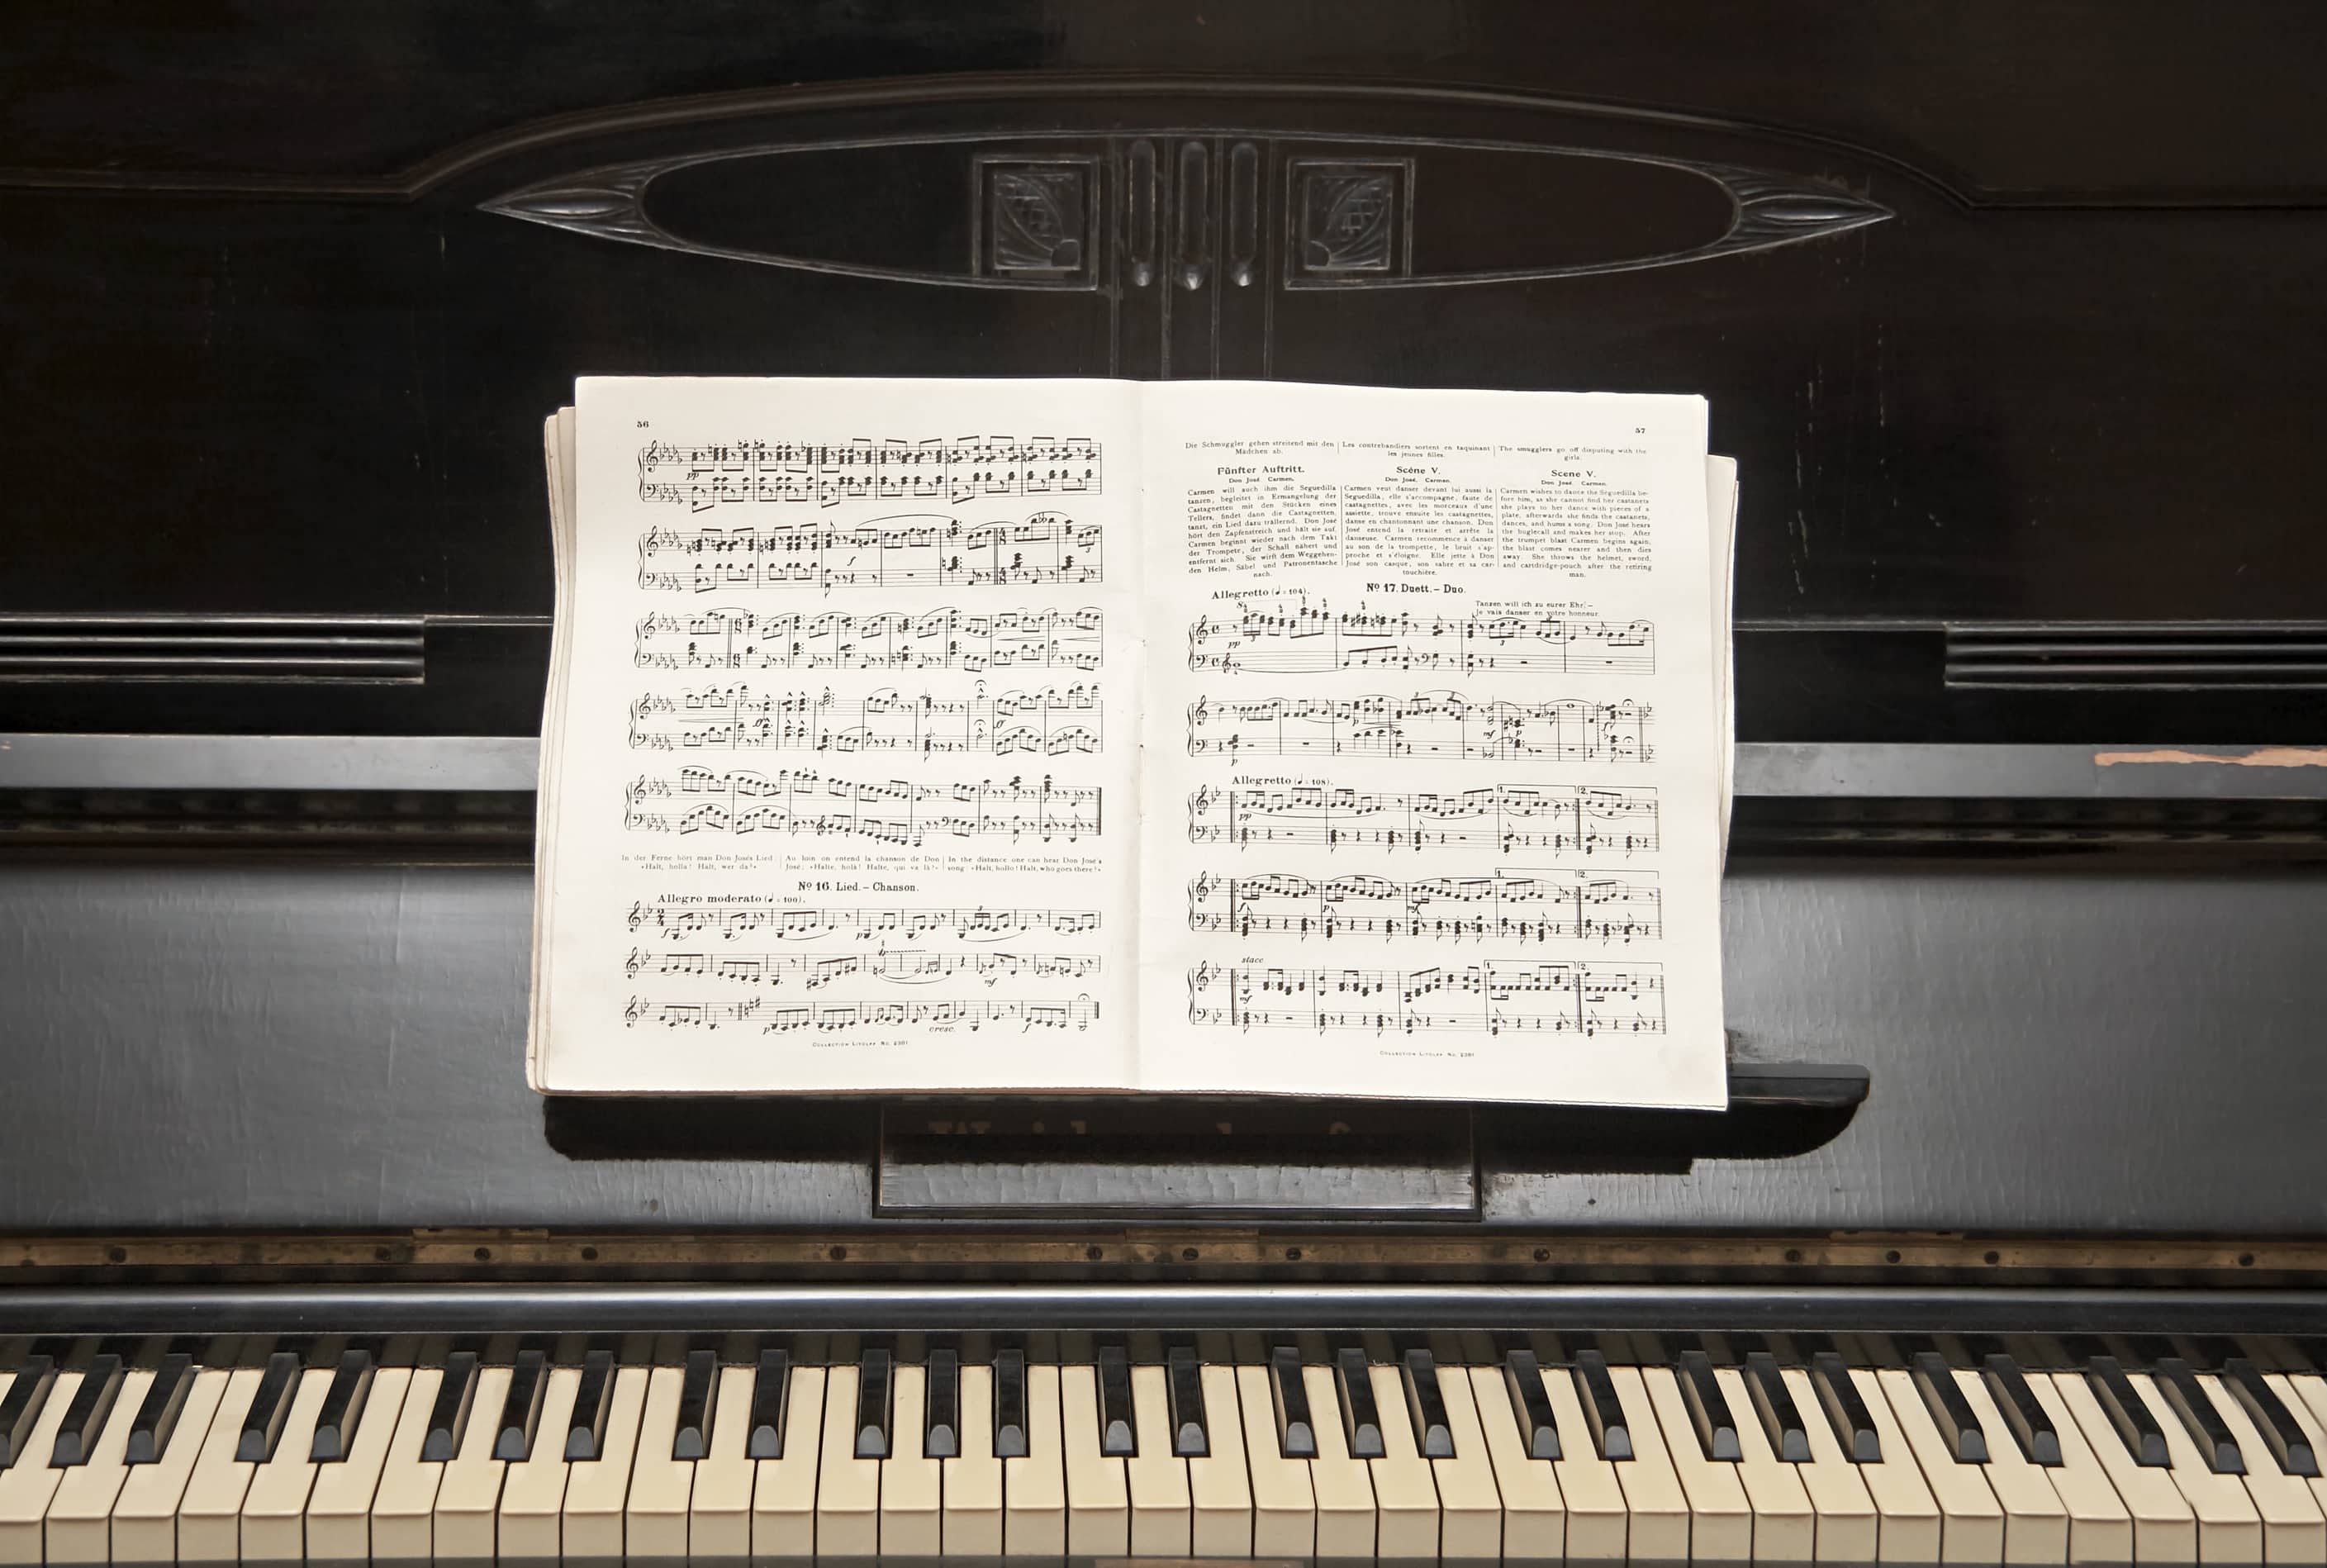 Do All Musicians Need to Learn Sheet Music? - Wyzant Blog